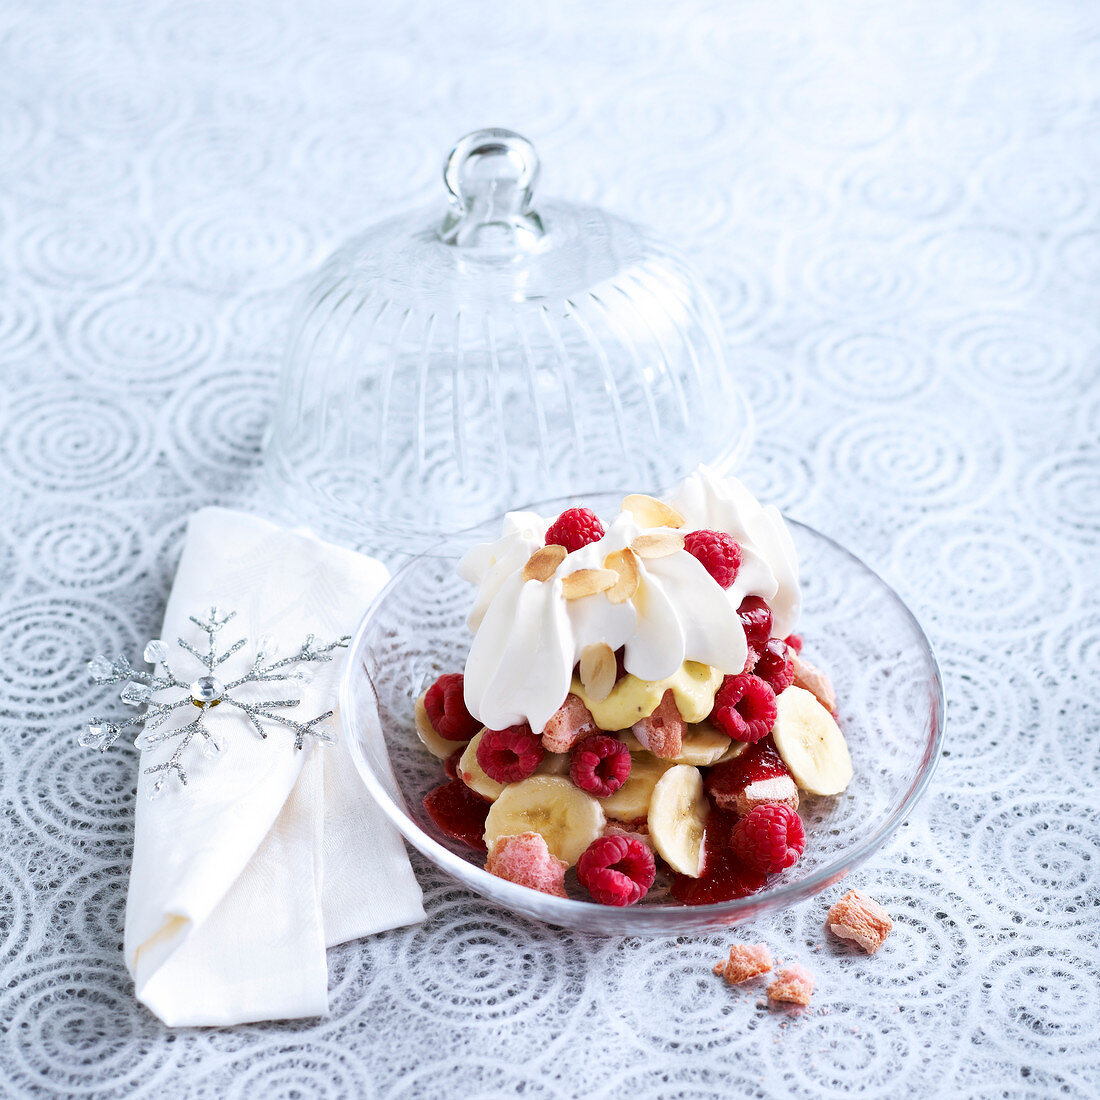 Raspberry, banana and Biscuits roses de Reims trifle